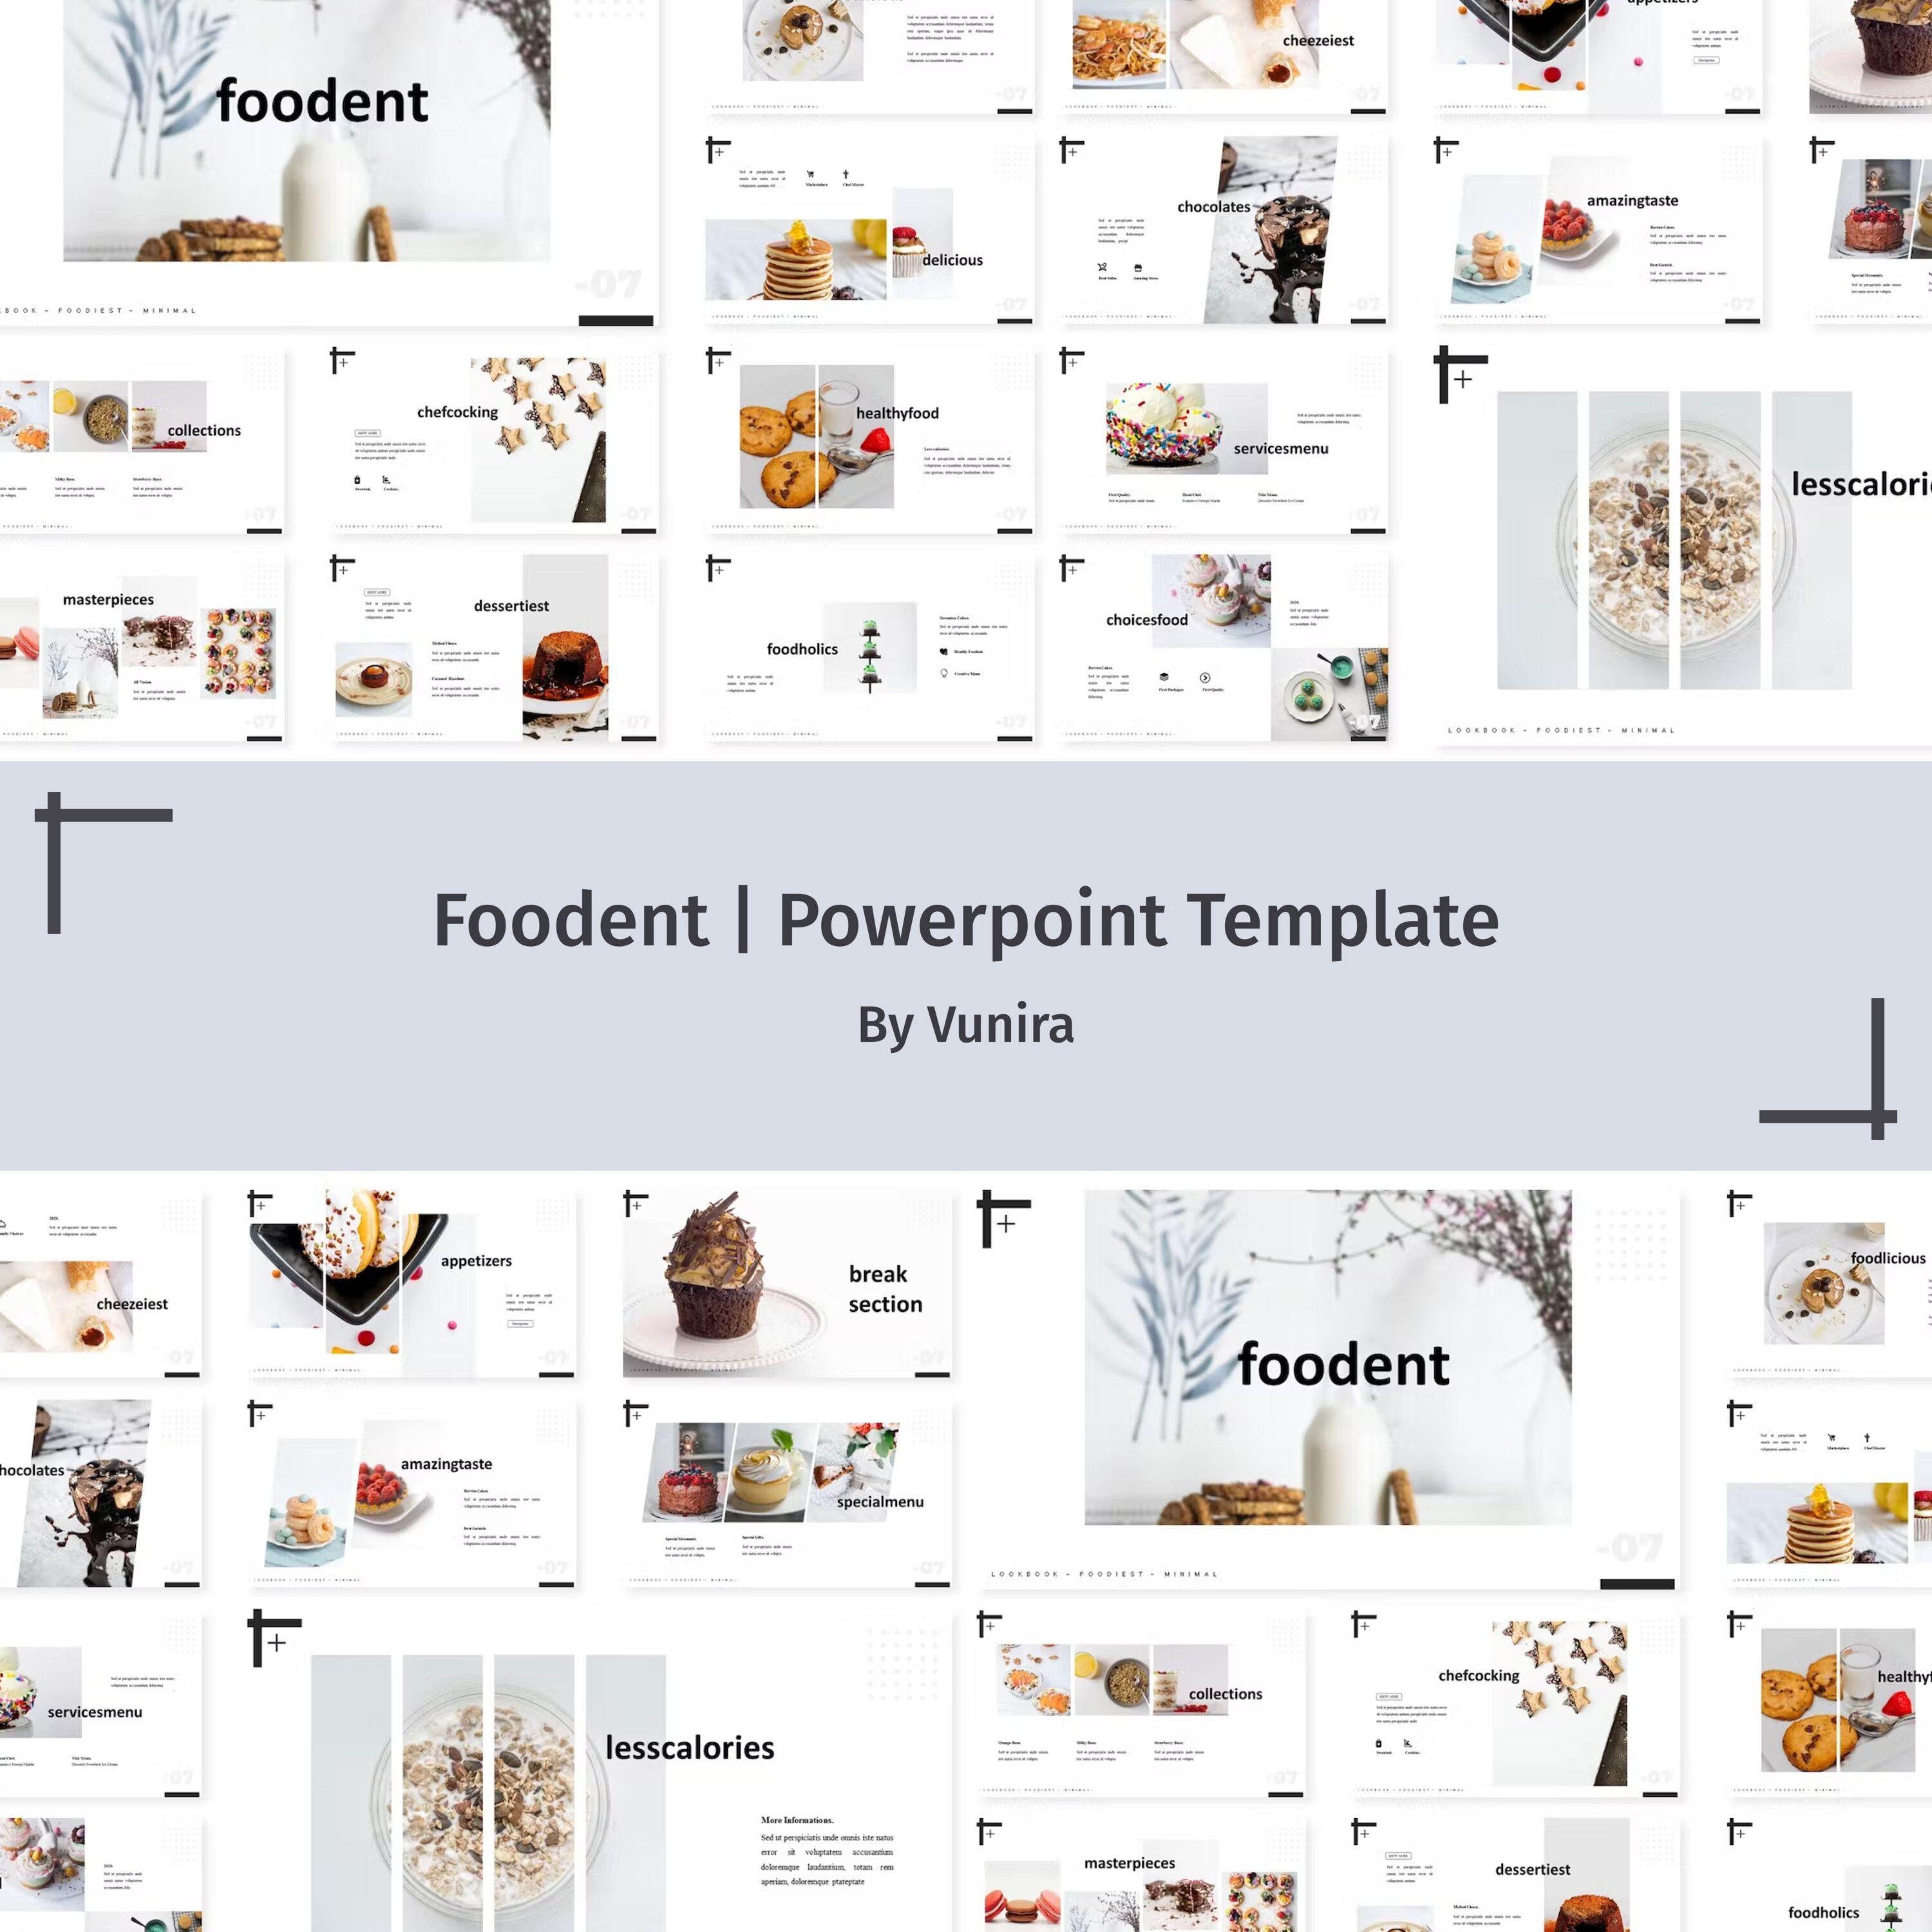 Foodent | Powerpoint Template - main image preview.